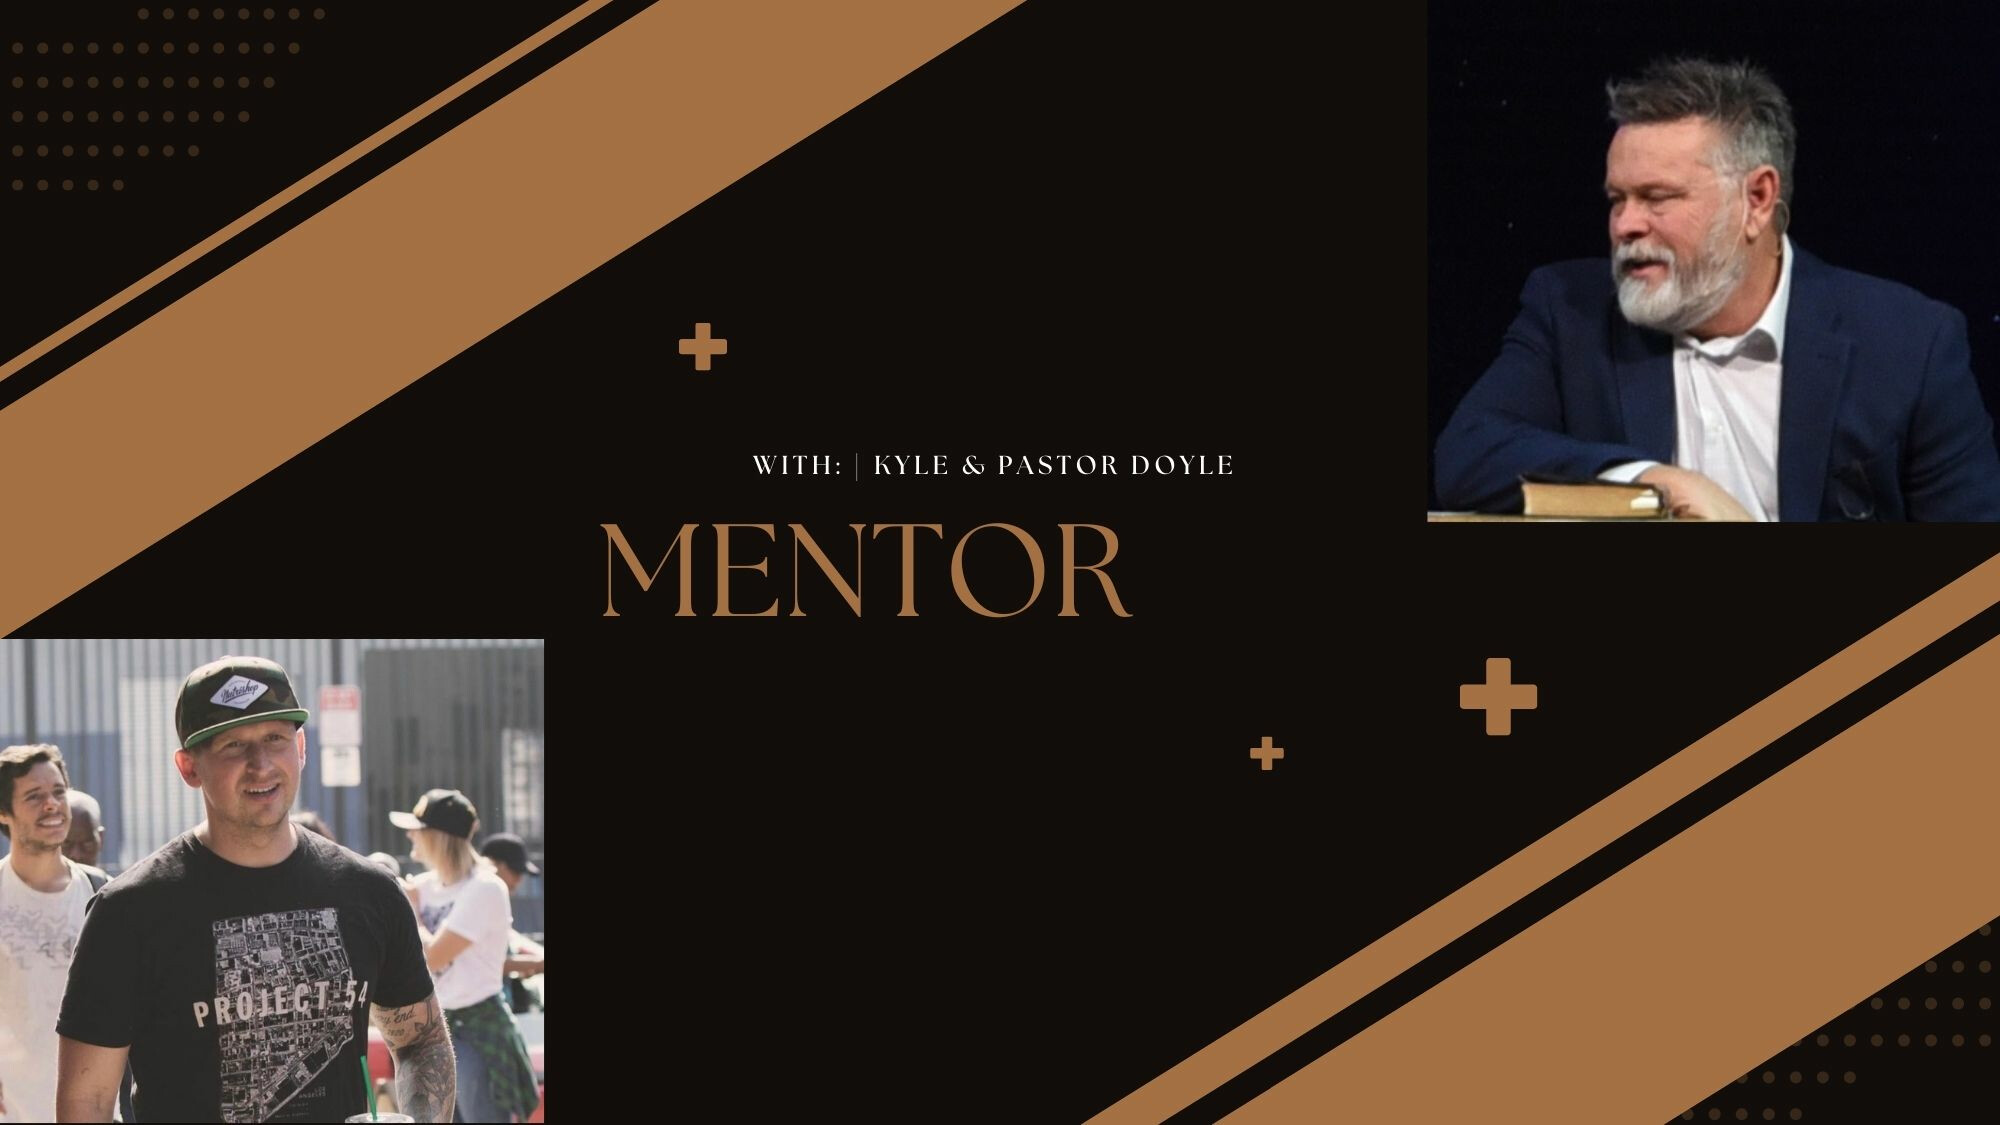 Lesson 7: Mentor (Sponsor) with Kyle and Pastor Doyle